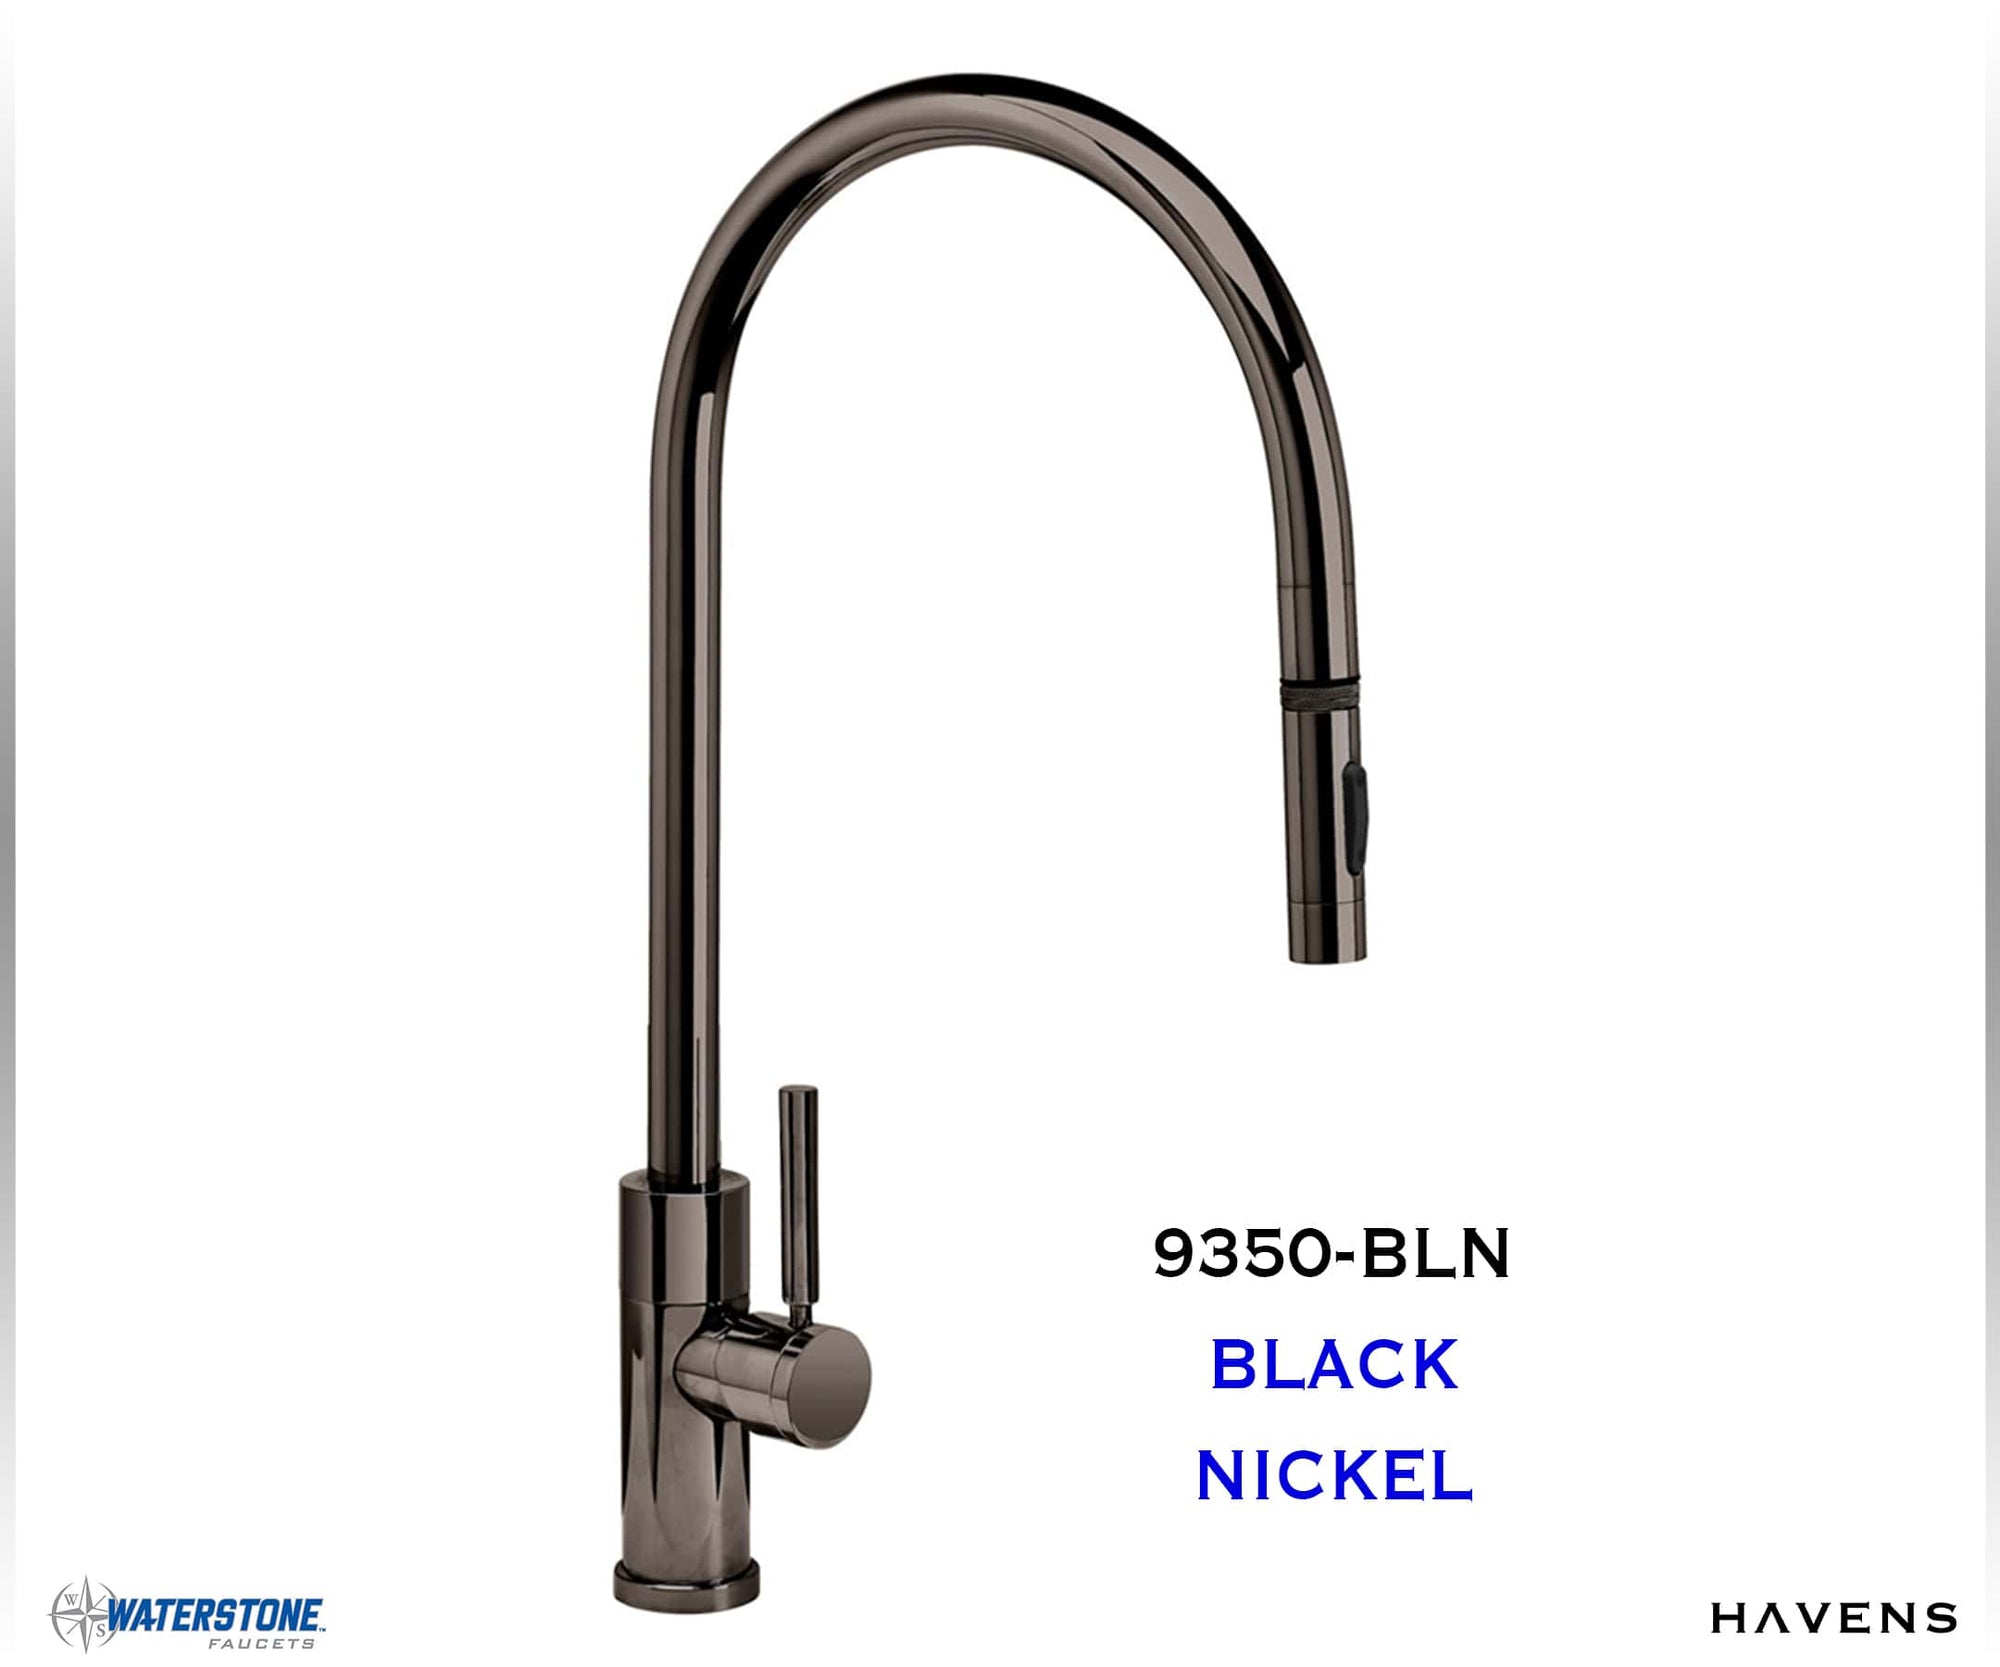 Waterstone Modern Extended Reach PLP Pulldown Faucet - 9350